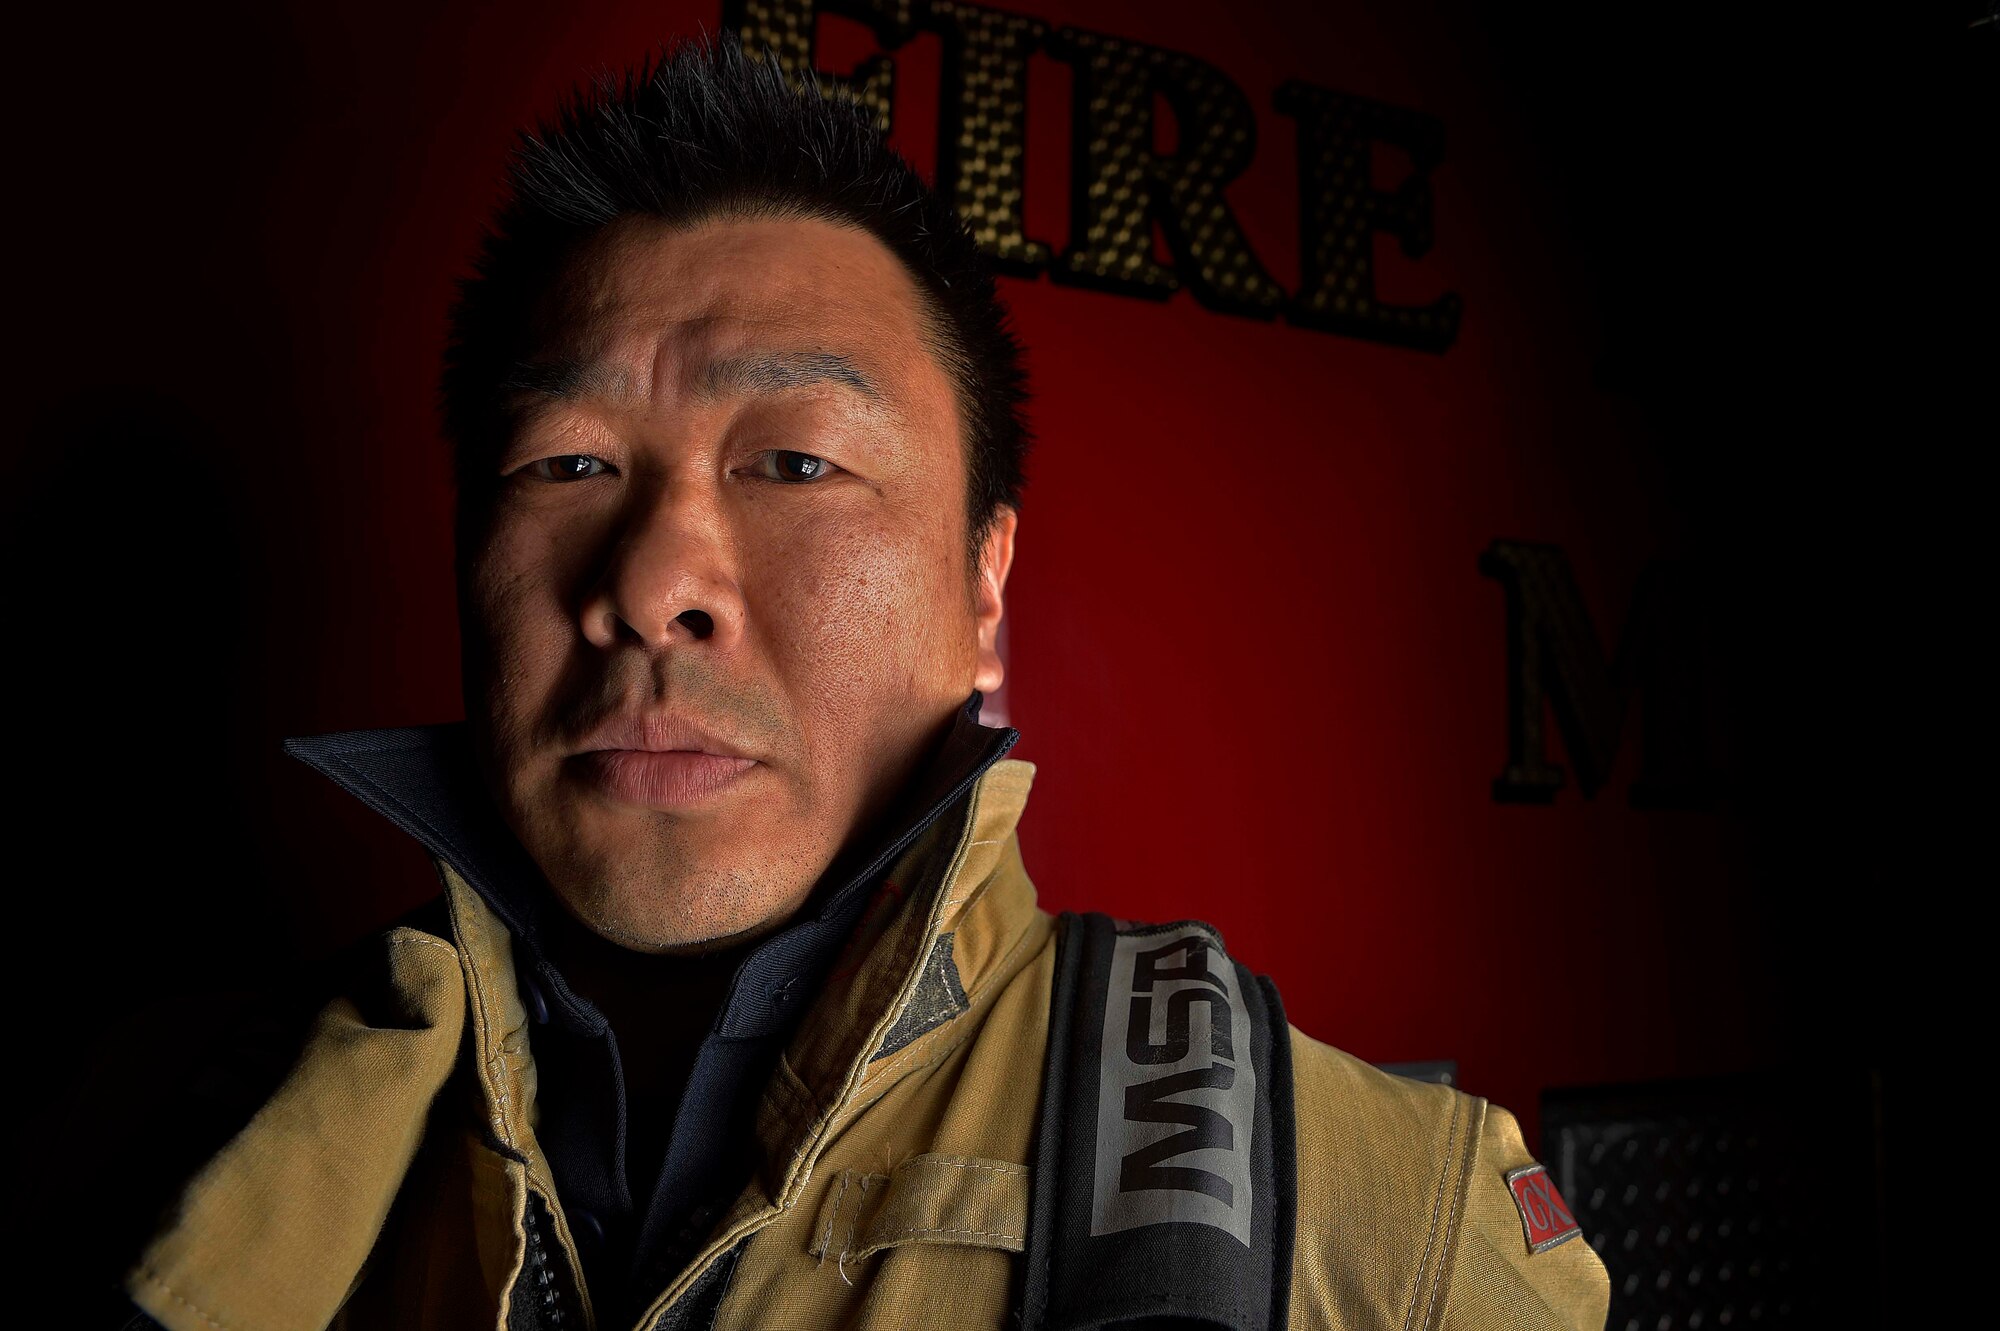 Takuya Kanto, a civilian firefighter with the 35th Civil Engineer Squadron, shares his story of personal growth and pursuit of unity between the U.S. and Japan while working as a firefighter at Misawa Air Base, Japan, March 3, 2016. During his more than 20 years of firefighting on MAB, Kanto has bridged the gap between local Japanese citizens and American military members in order to strengthen relations between both nations. Kanto was also present for the Great East Japan earthquake and tsunami that struck Japan in March 2011. His volunteer efforts lead to the relief contributed by military and civilians worldwide. (U.S. Air Force photo by Senior Airman Patrick S. Ciccarone)